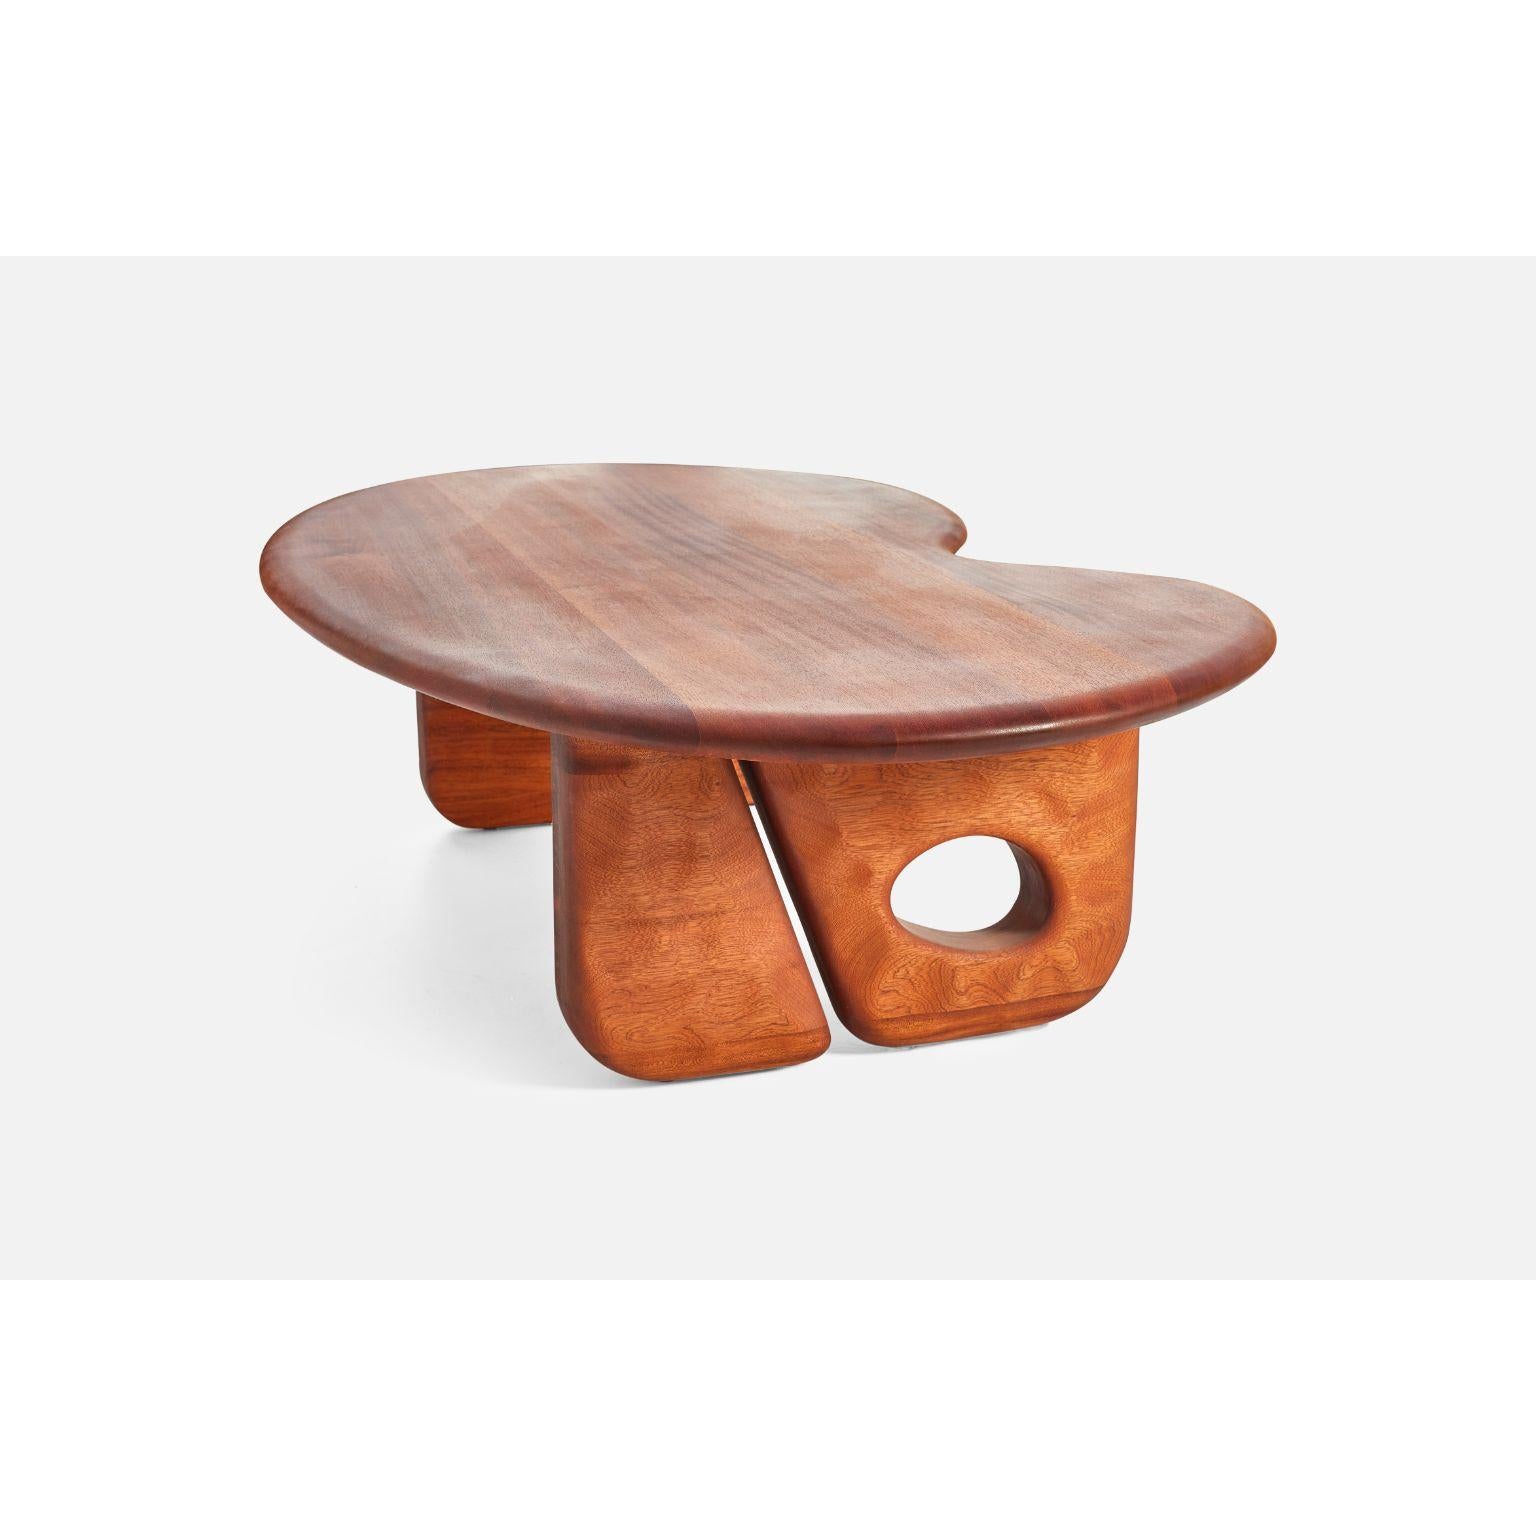 Avasin Low Table by Contemporary Ecowood (Türkisch) im Angebot